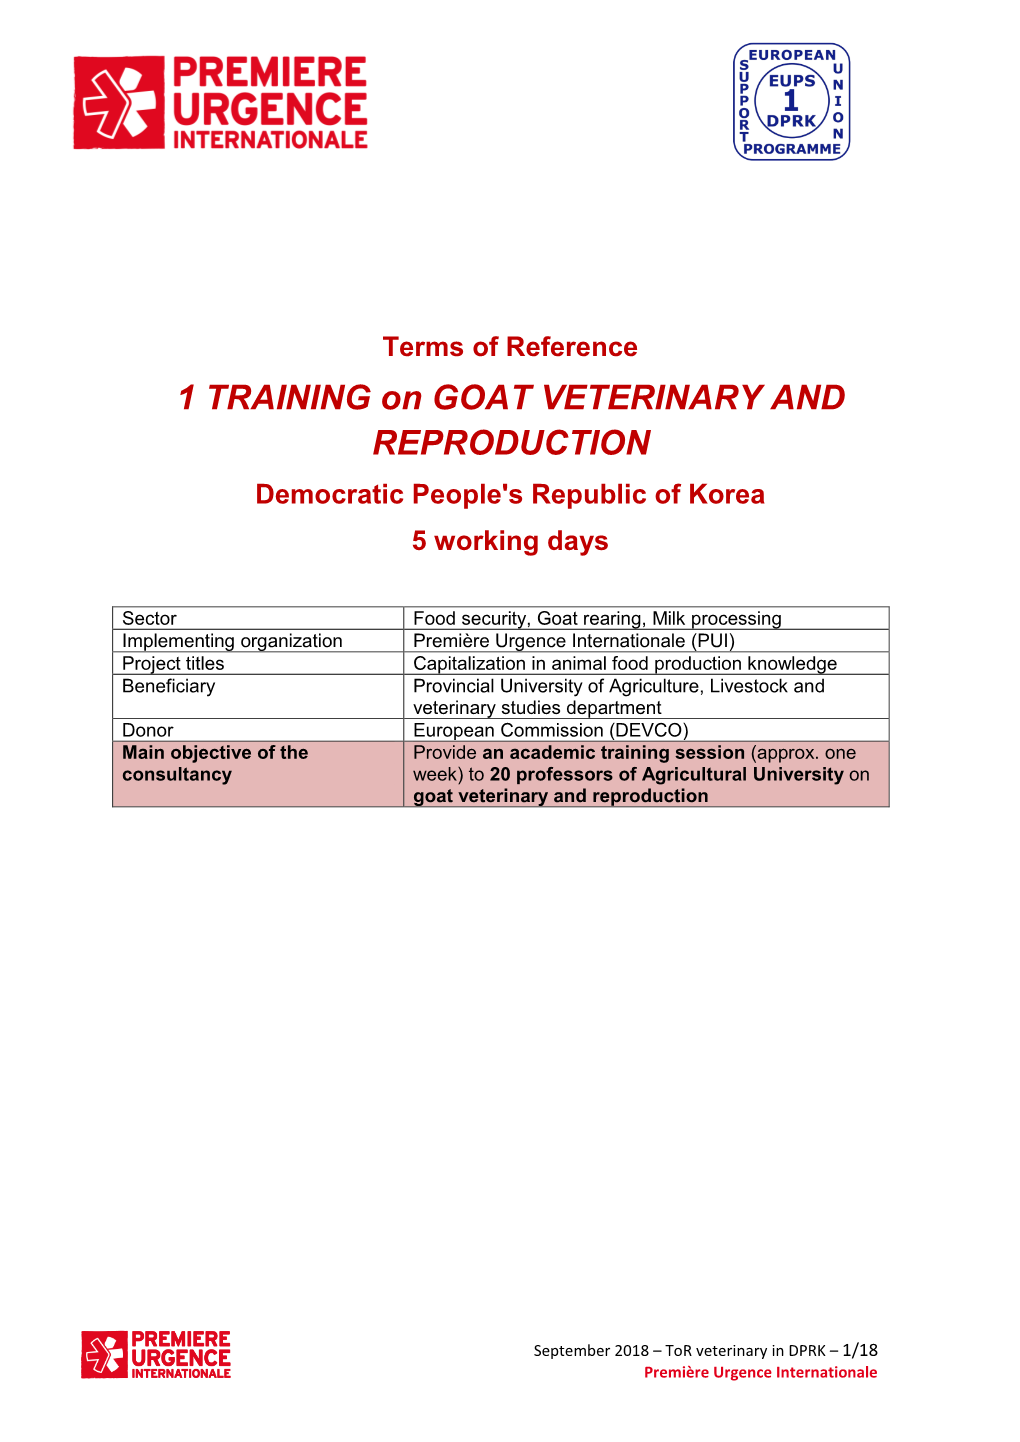 1 TRAINING on GOAT VETERINARY and REPRODUCTION Democratic People's Republic of Korea 5 Working Days